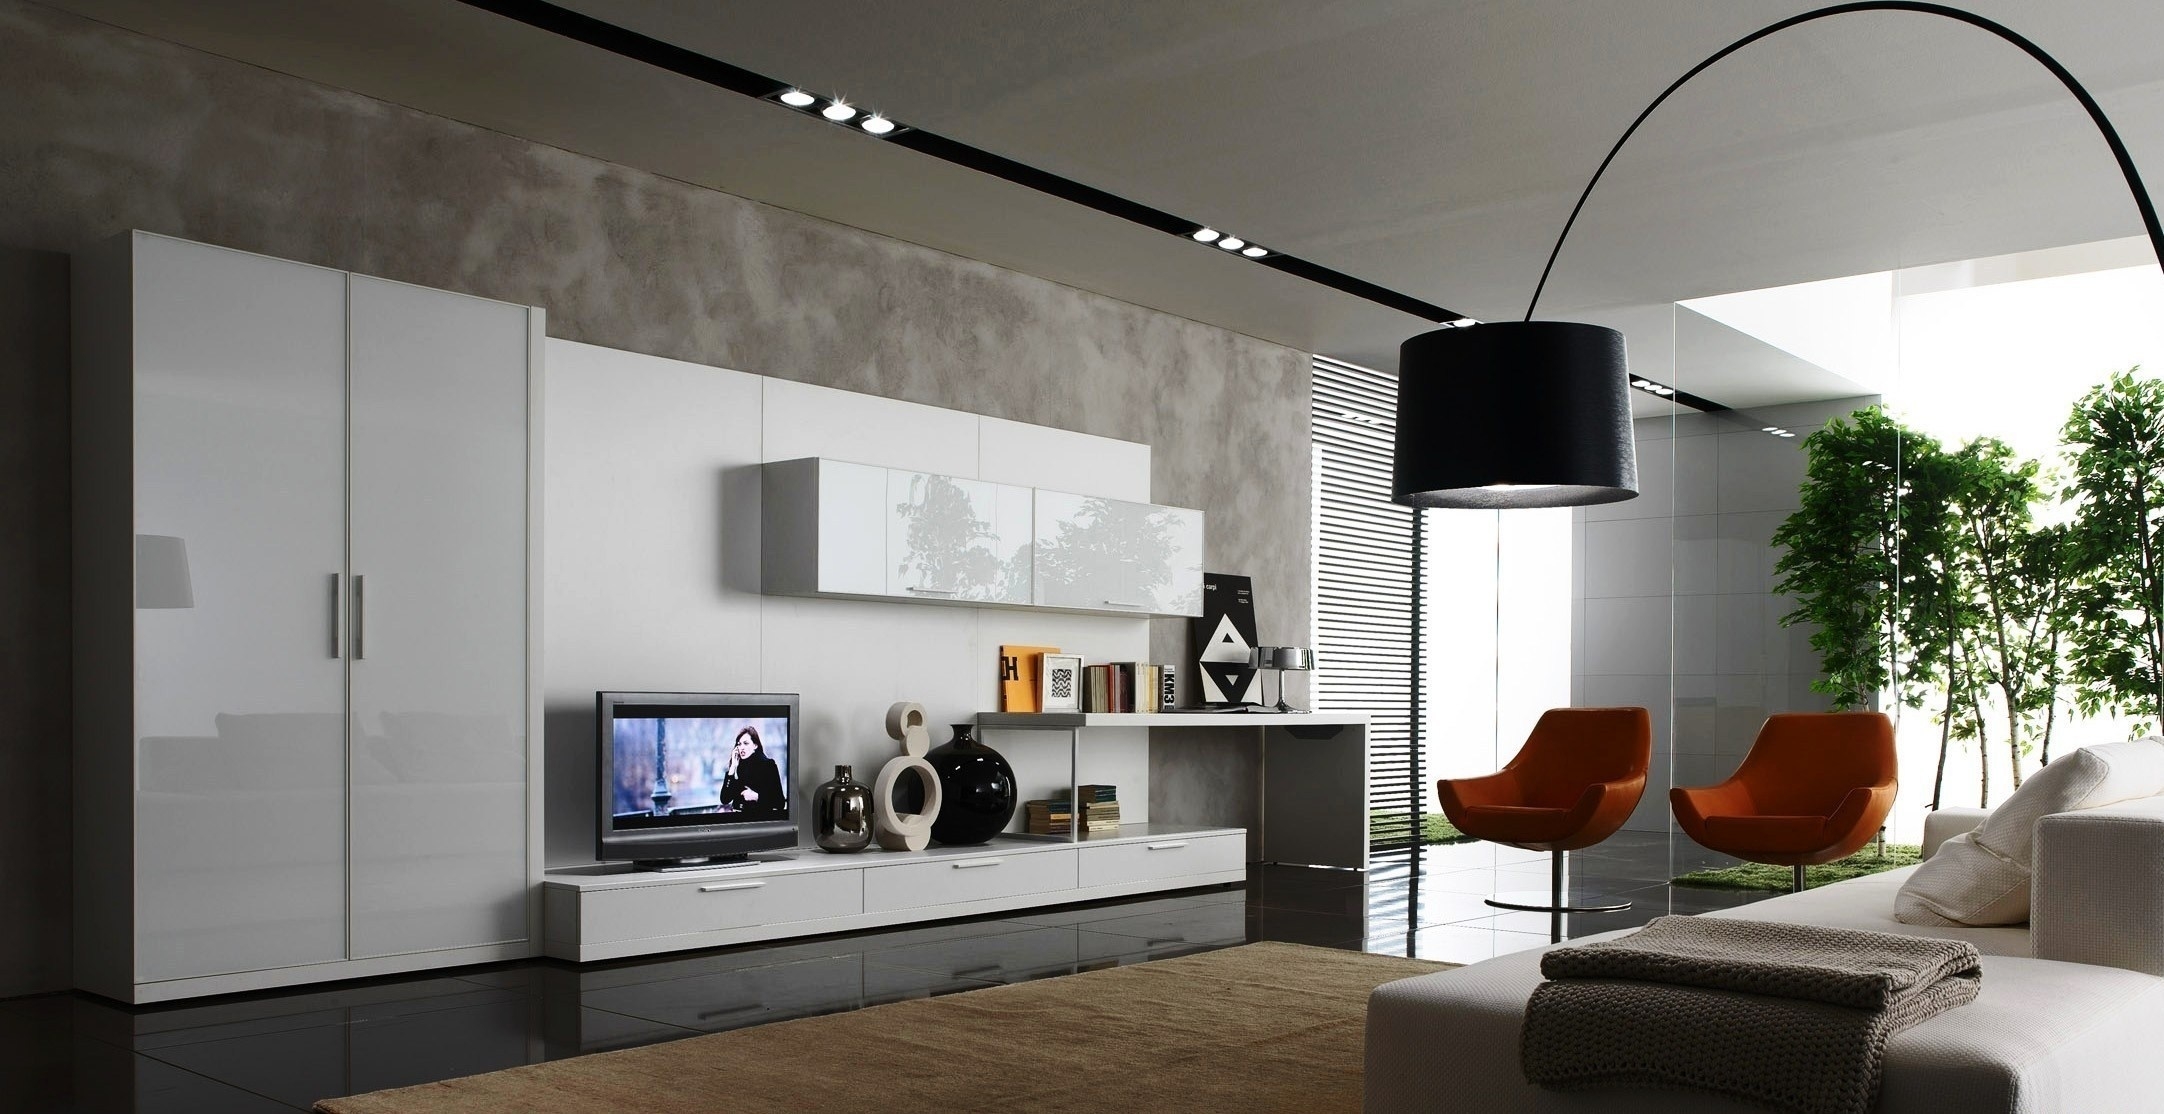 furniture, living room, interior, miscellanea, miscellaneous, design, sofa, modern, up to date, television, television set cellphone